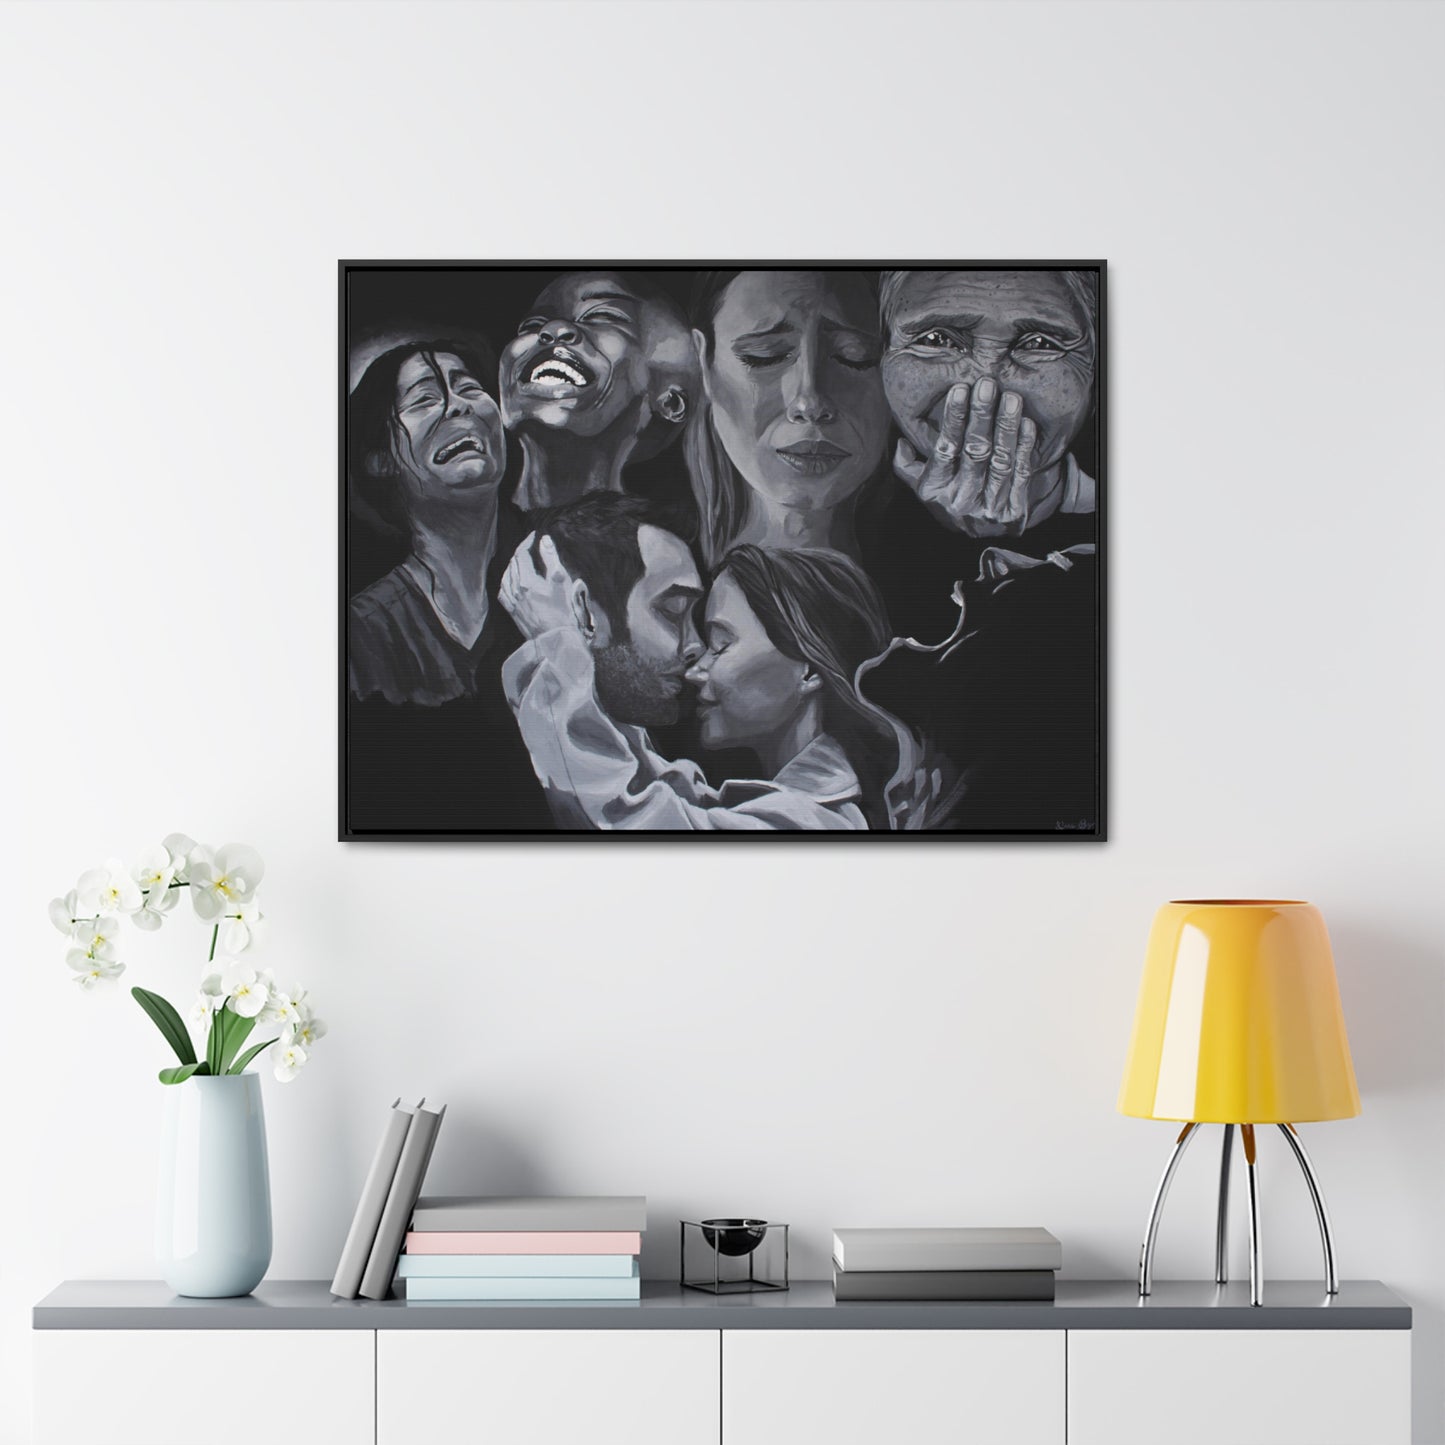 Acrylic Painting Print "Emotions" on Gallery Canvas Wraps, Horizontal Frame